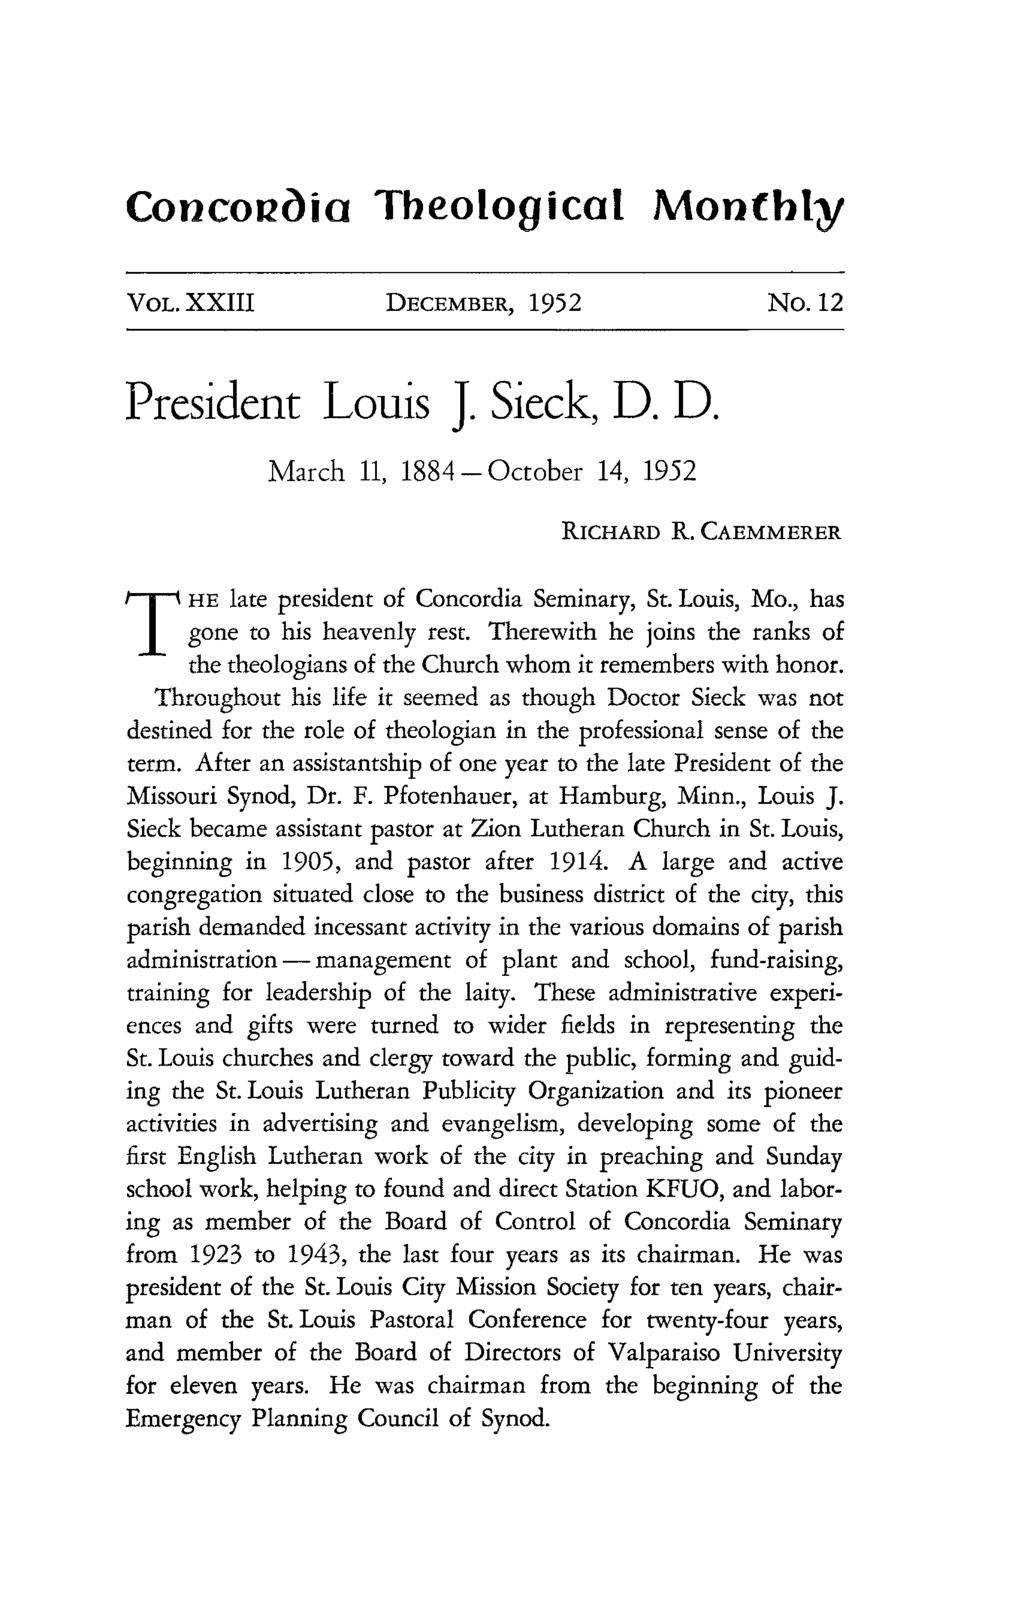 Concou(}ia Theological Monthly VOL. XXIII DECEMBER, 1952 No. 12 President Louis J. Sieck, D. D. March 11, 1884 - October 14, 1952 RICHARD R. CAEMMERER THE late president of Concordia Seminary, St.